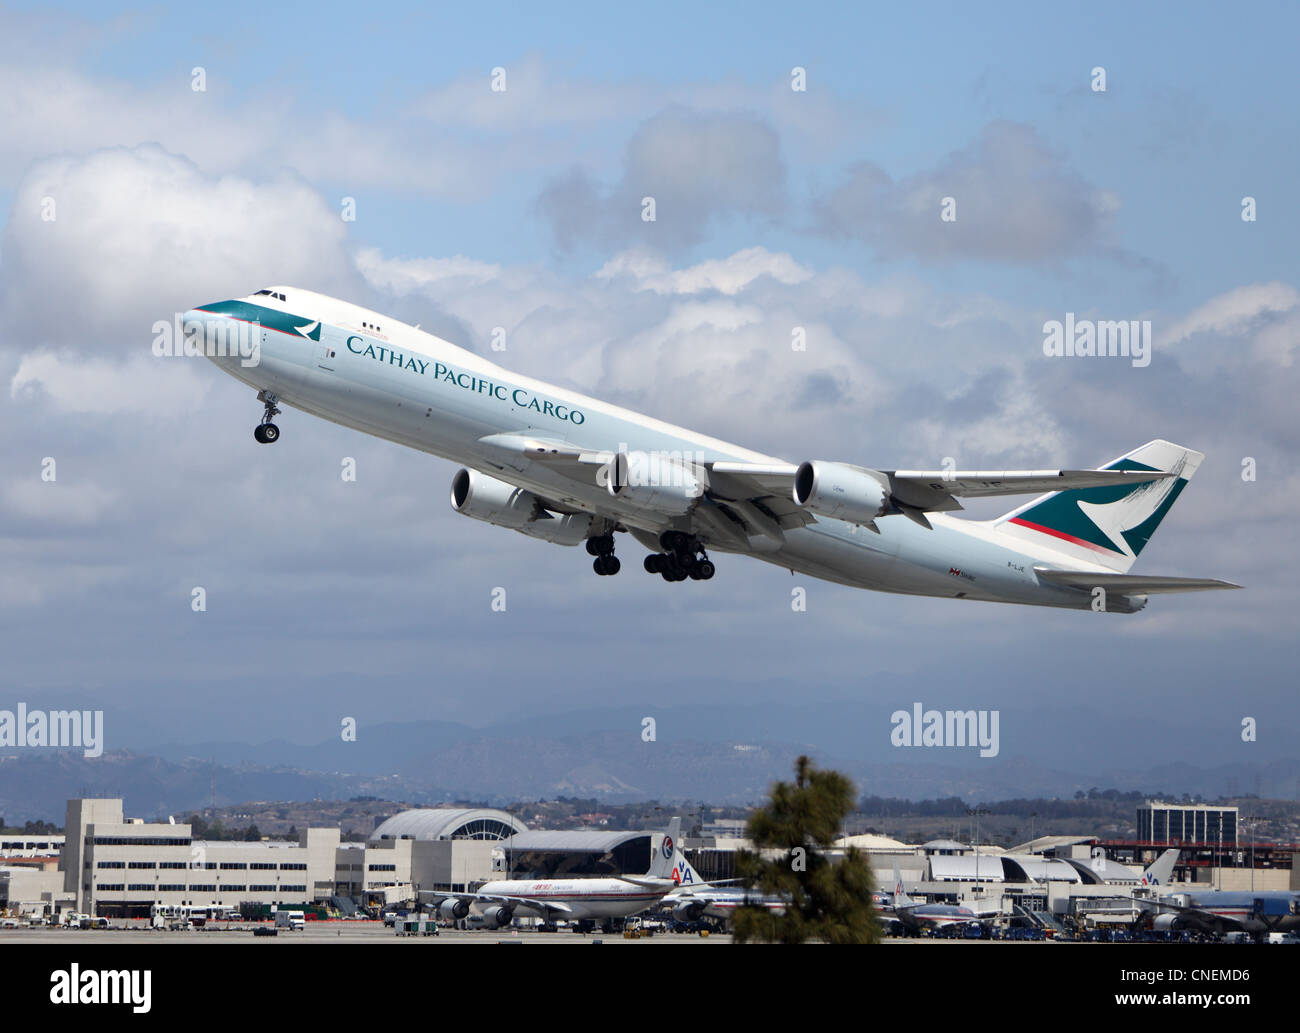 LOS ANGELES, CALIFORNIA, USA - APRIL 12, 2012 - Cathay Pacific B747-8 Freighter jet plane takes off at Los Angeles Airport. Stock Photo